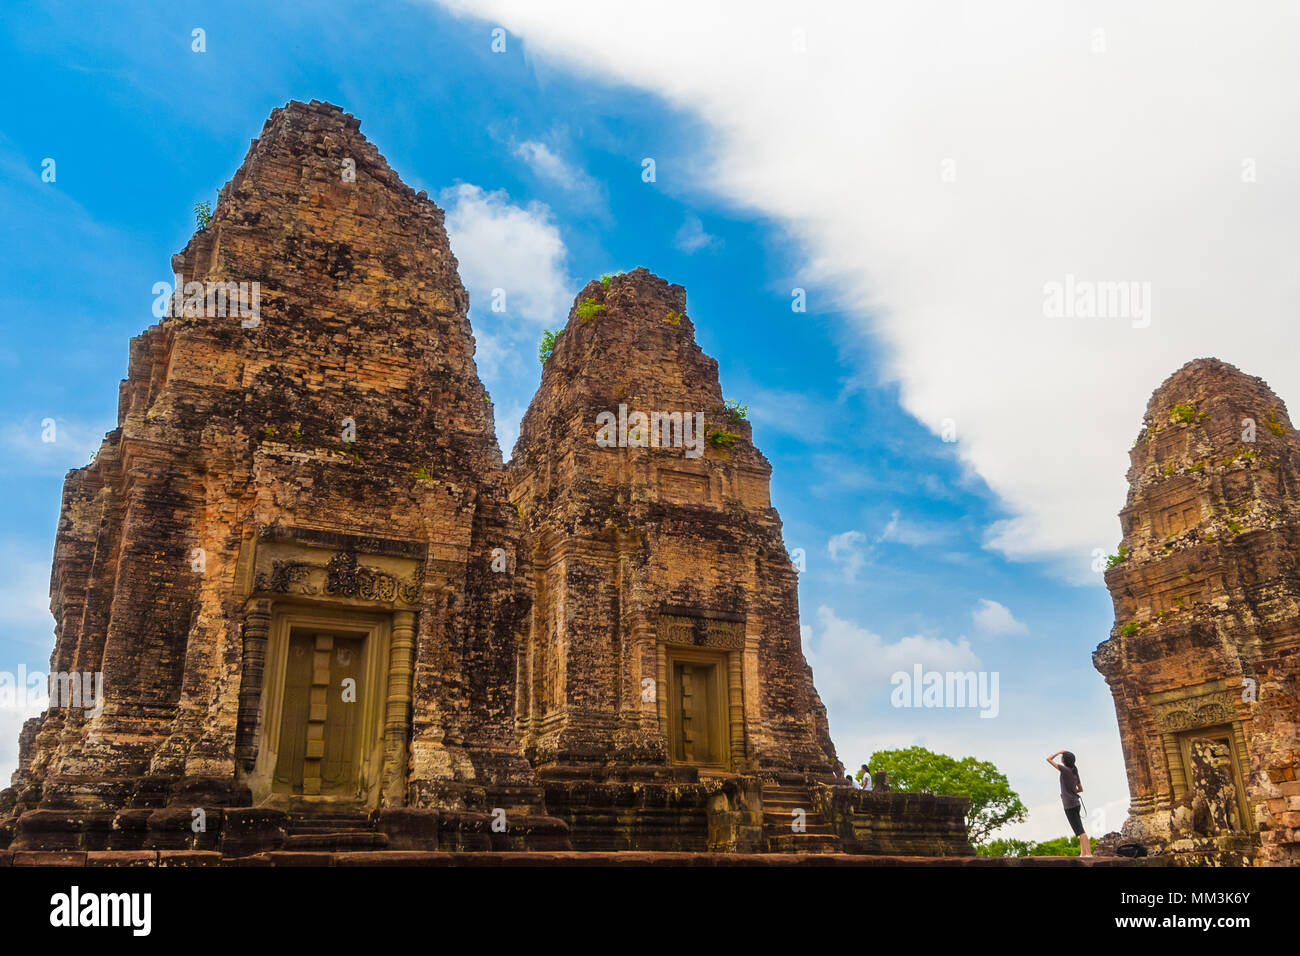 Great photo of a tourist looking up to two laterite brick towers of the inner sanctuary in Cambodia's East Mebon temple. Stock Photo